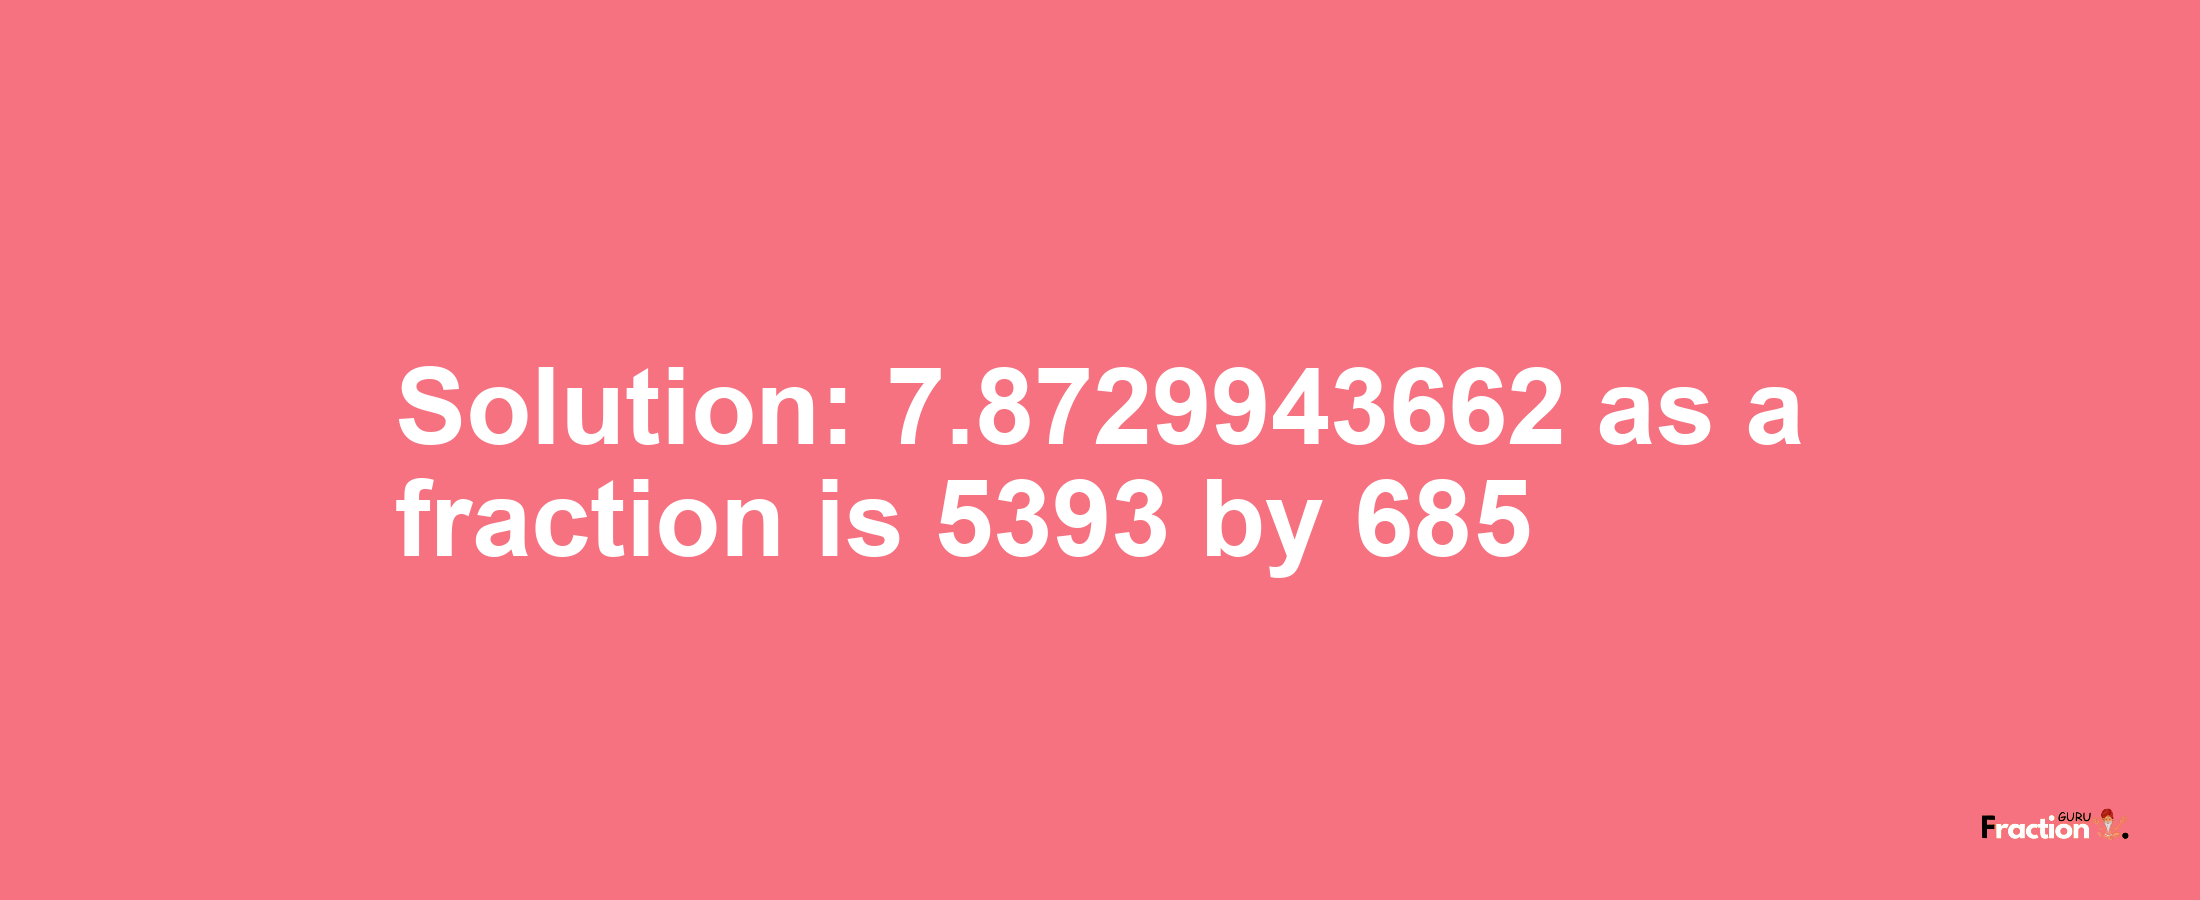 Solution:7.8729943662 as a fraction is 5393/685